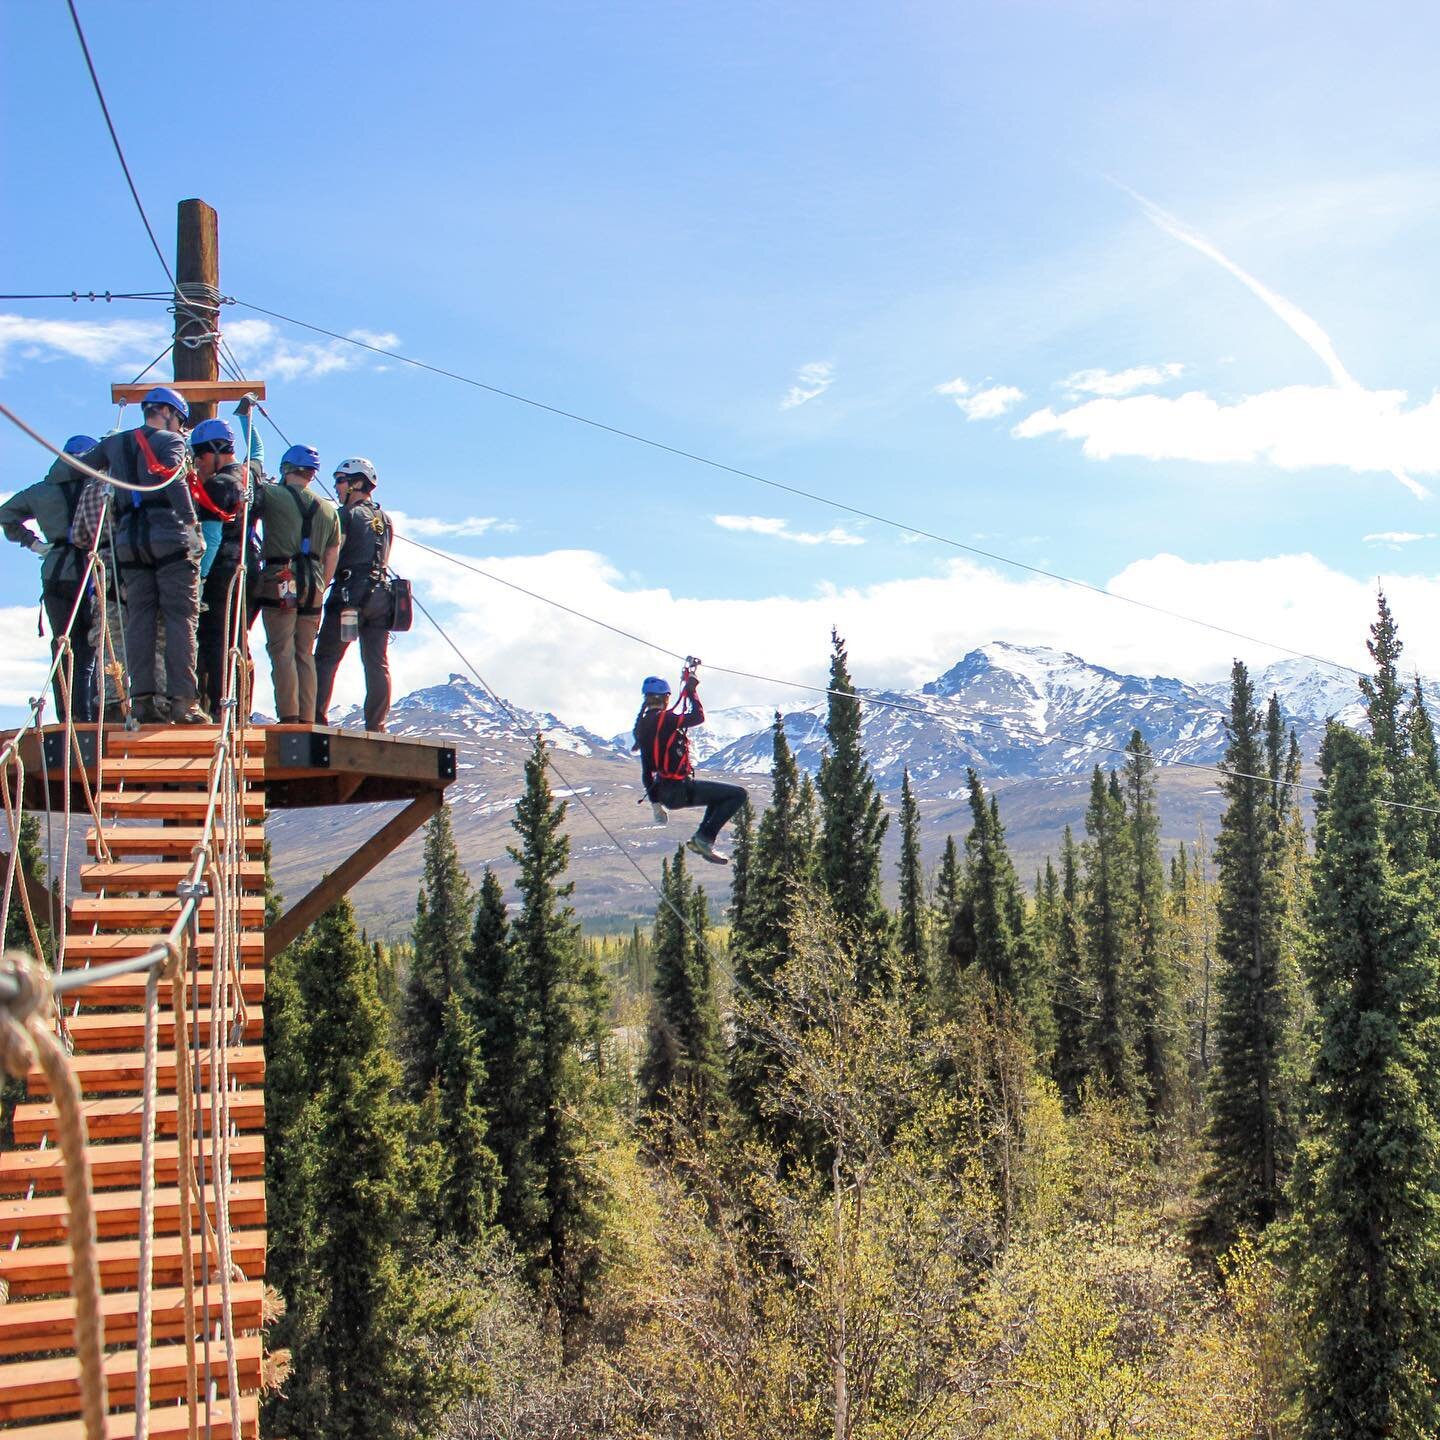 Did you know - most of our ziplines start above the trees so the views are amazing 😍